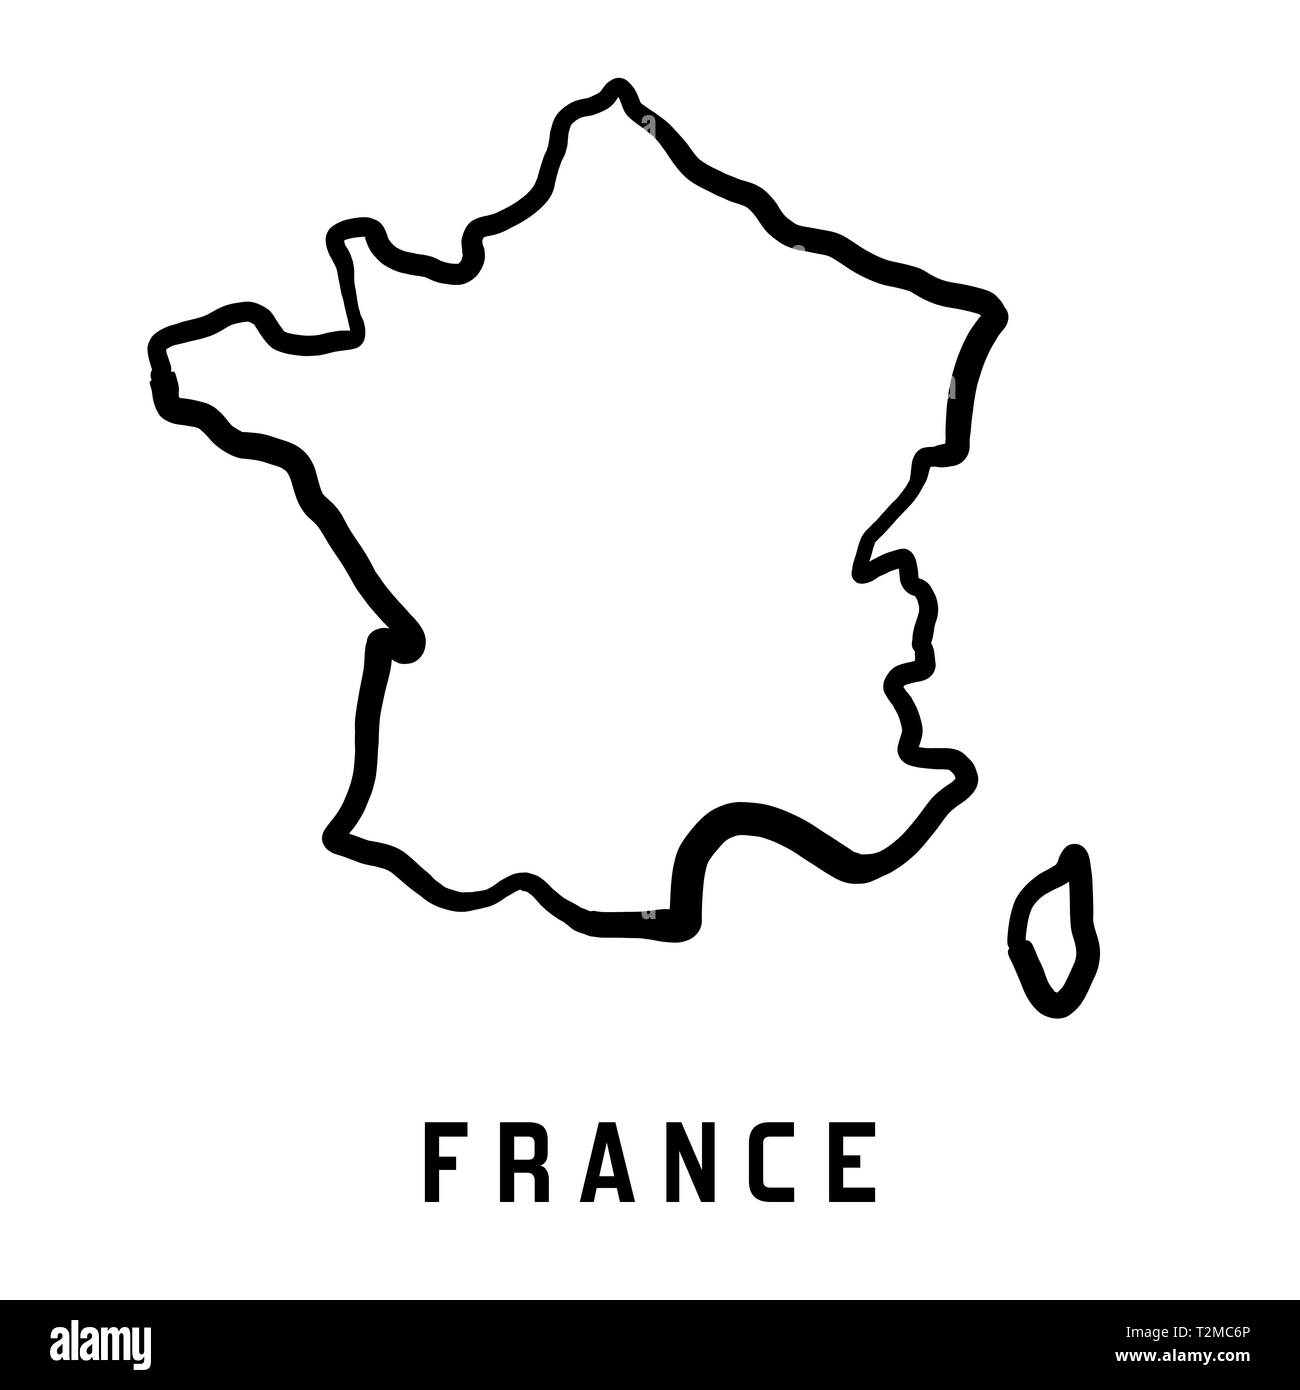 France map outline - smooth country shape map vector Stock Vector